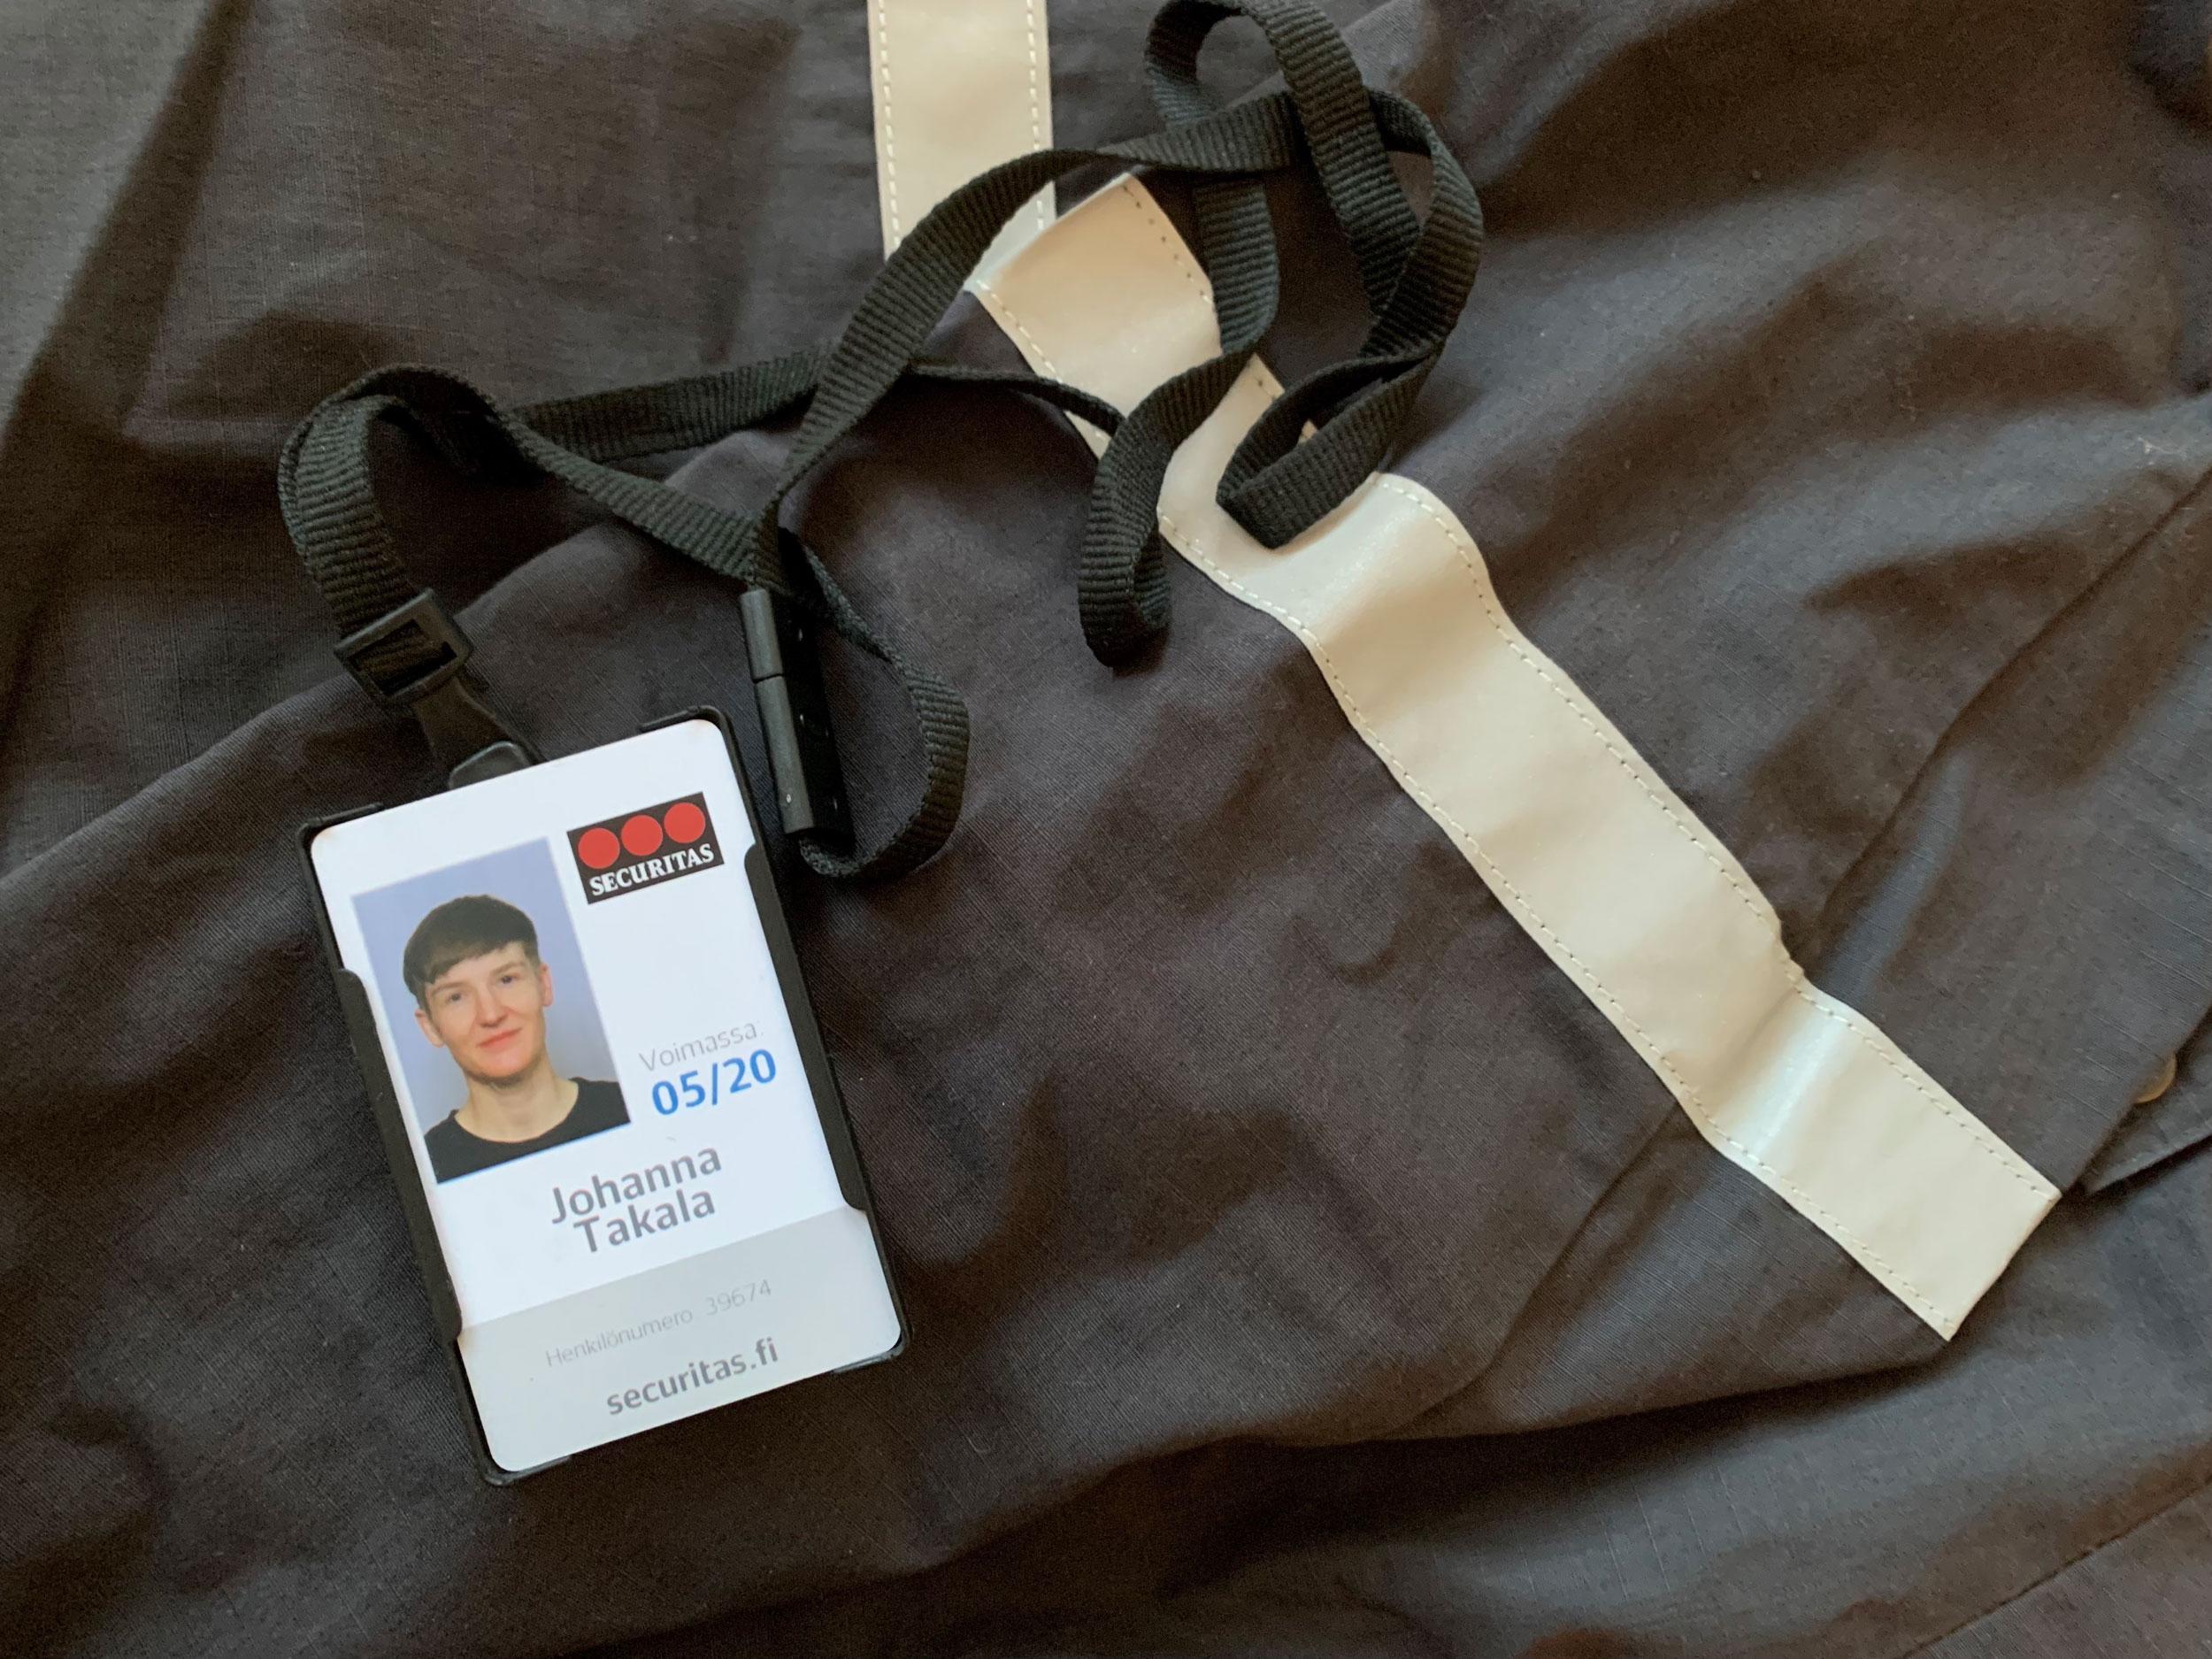 Black uniform-like fabric, with a security company personnel's identity card kept on it. The card carries artist Pilvi Takala's headshot with the name Johanna Takala under it, and a logo of the company Securitas.